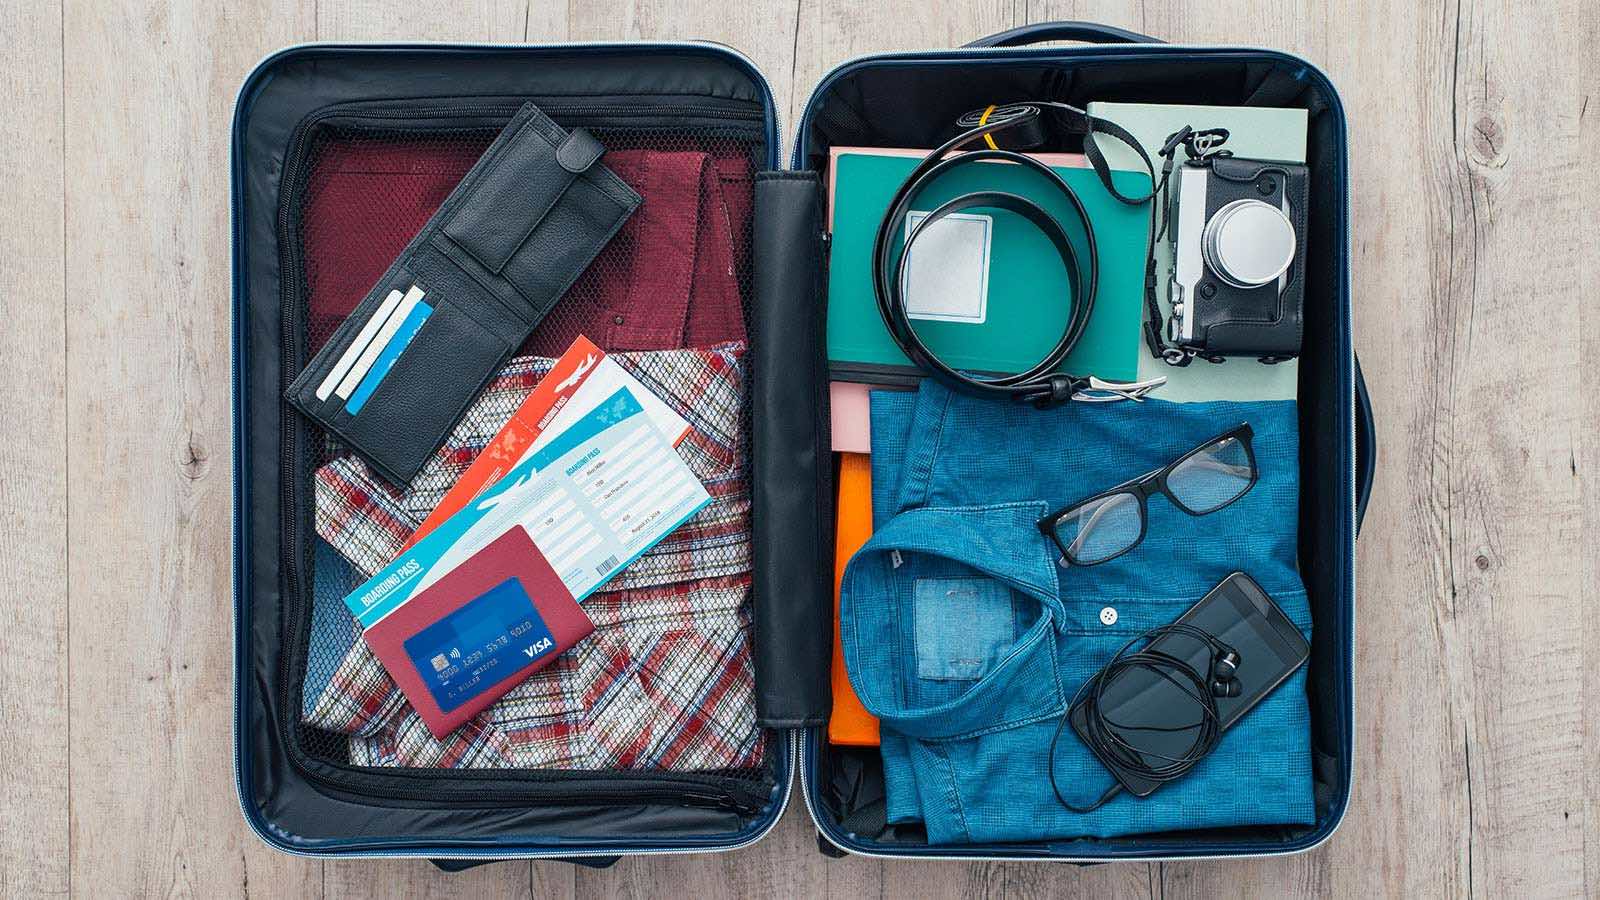 Open suitcase packed for travel with clothing, personal electronics, camera, wallet, airline tickets, passport and Visa card.